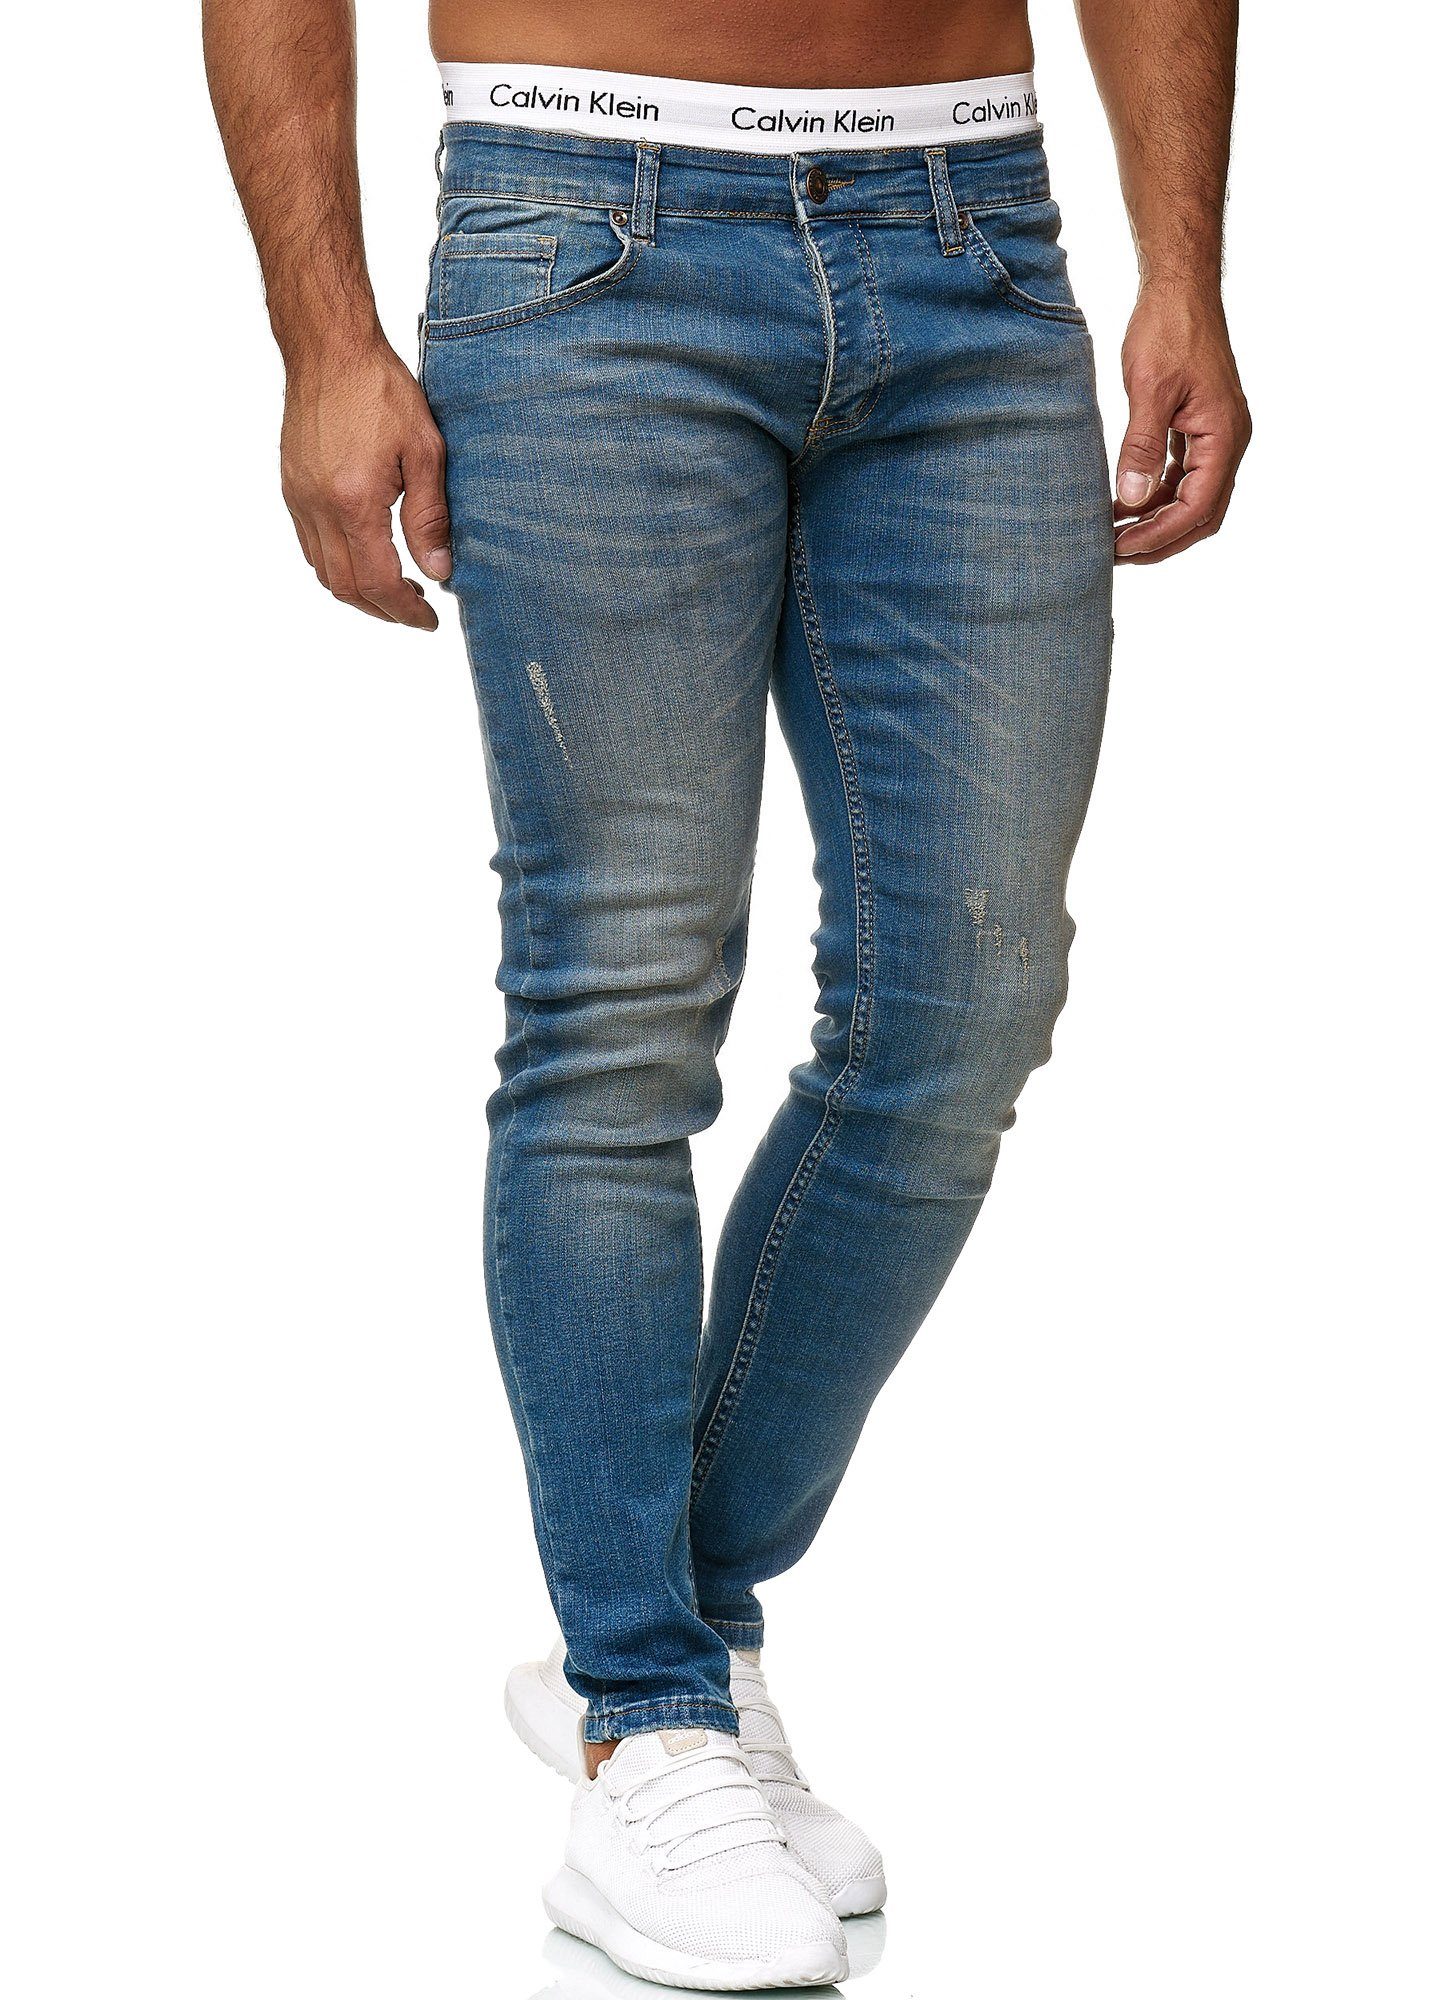 Used Designerjeans 600JS Freizeit Business OneRedox Casual Dirty (Jeanshose Bootcut, 1-tlg) Straight-Jeans 613 Blue